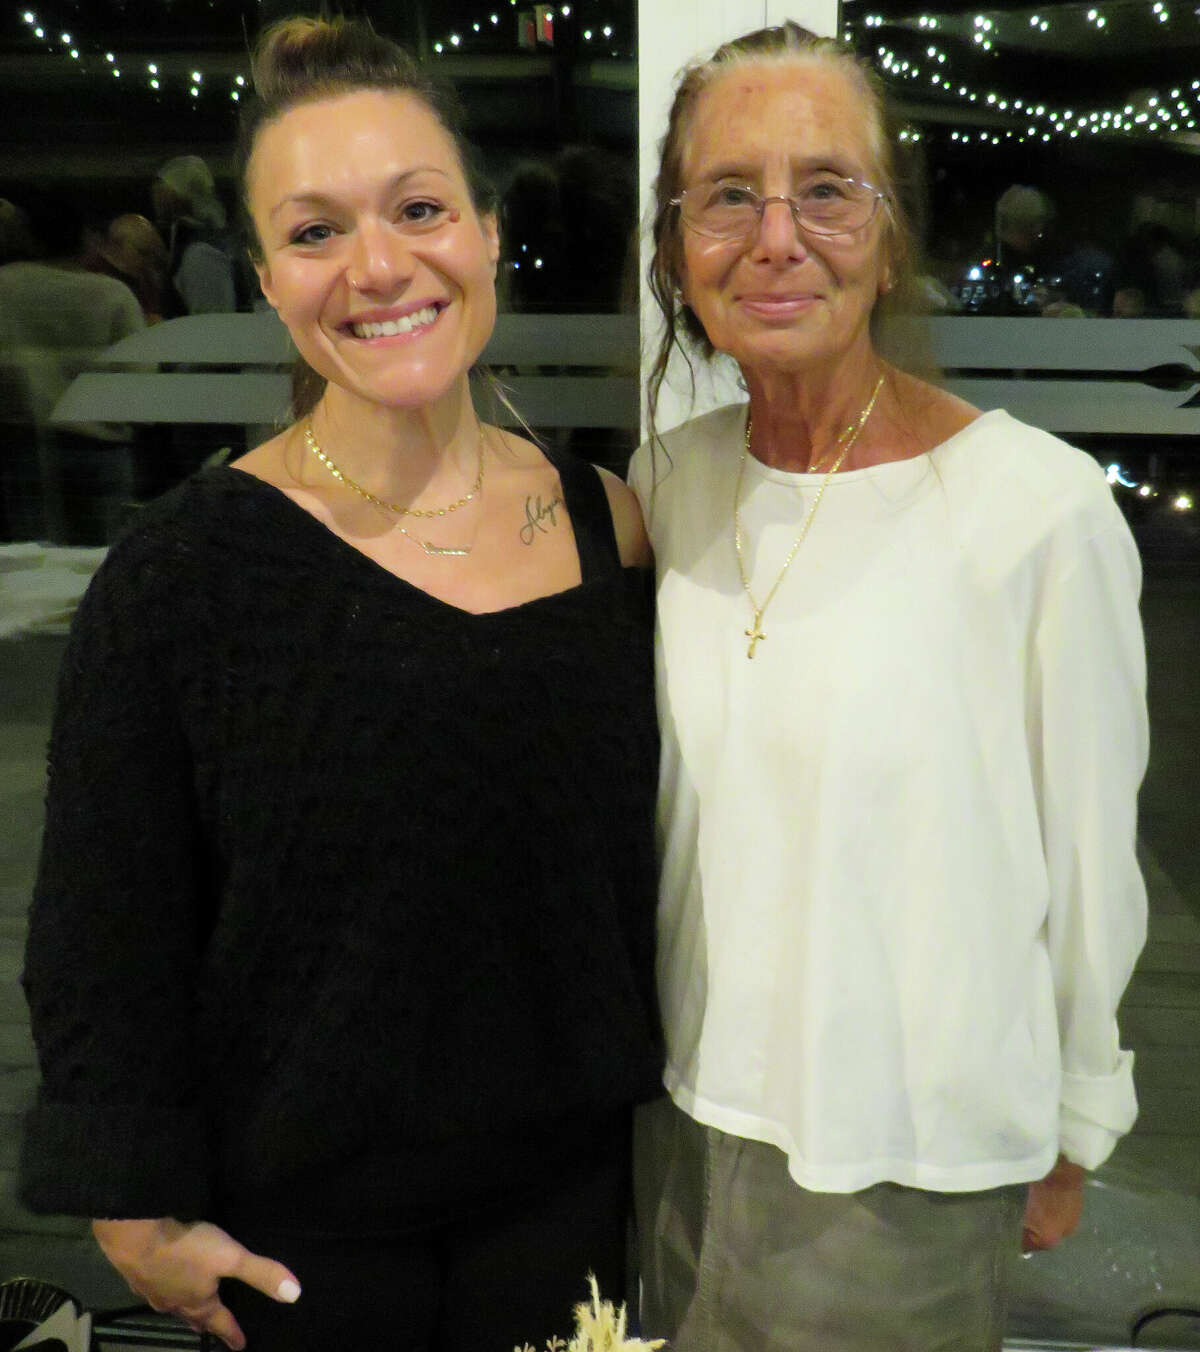 Giovanna Mazzariello, owner of Crostini, with her mother Joan Mazzariello, at the Branford Gets Fed tasting event at Stony Creek Brewery.